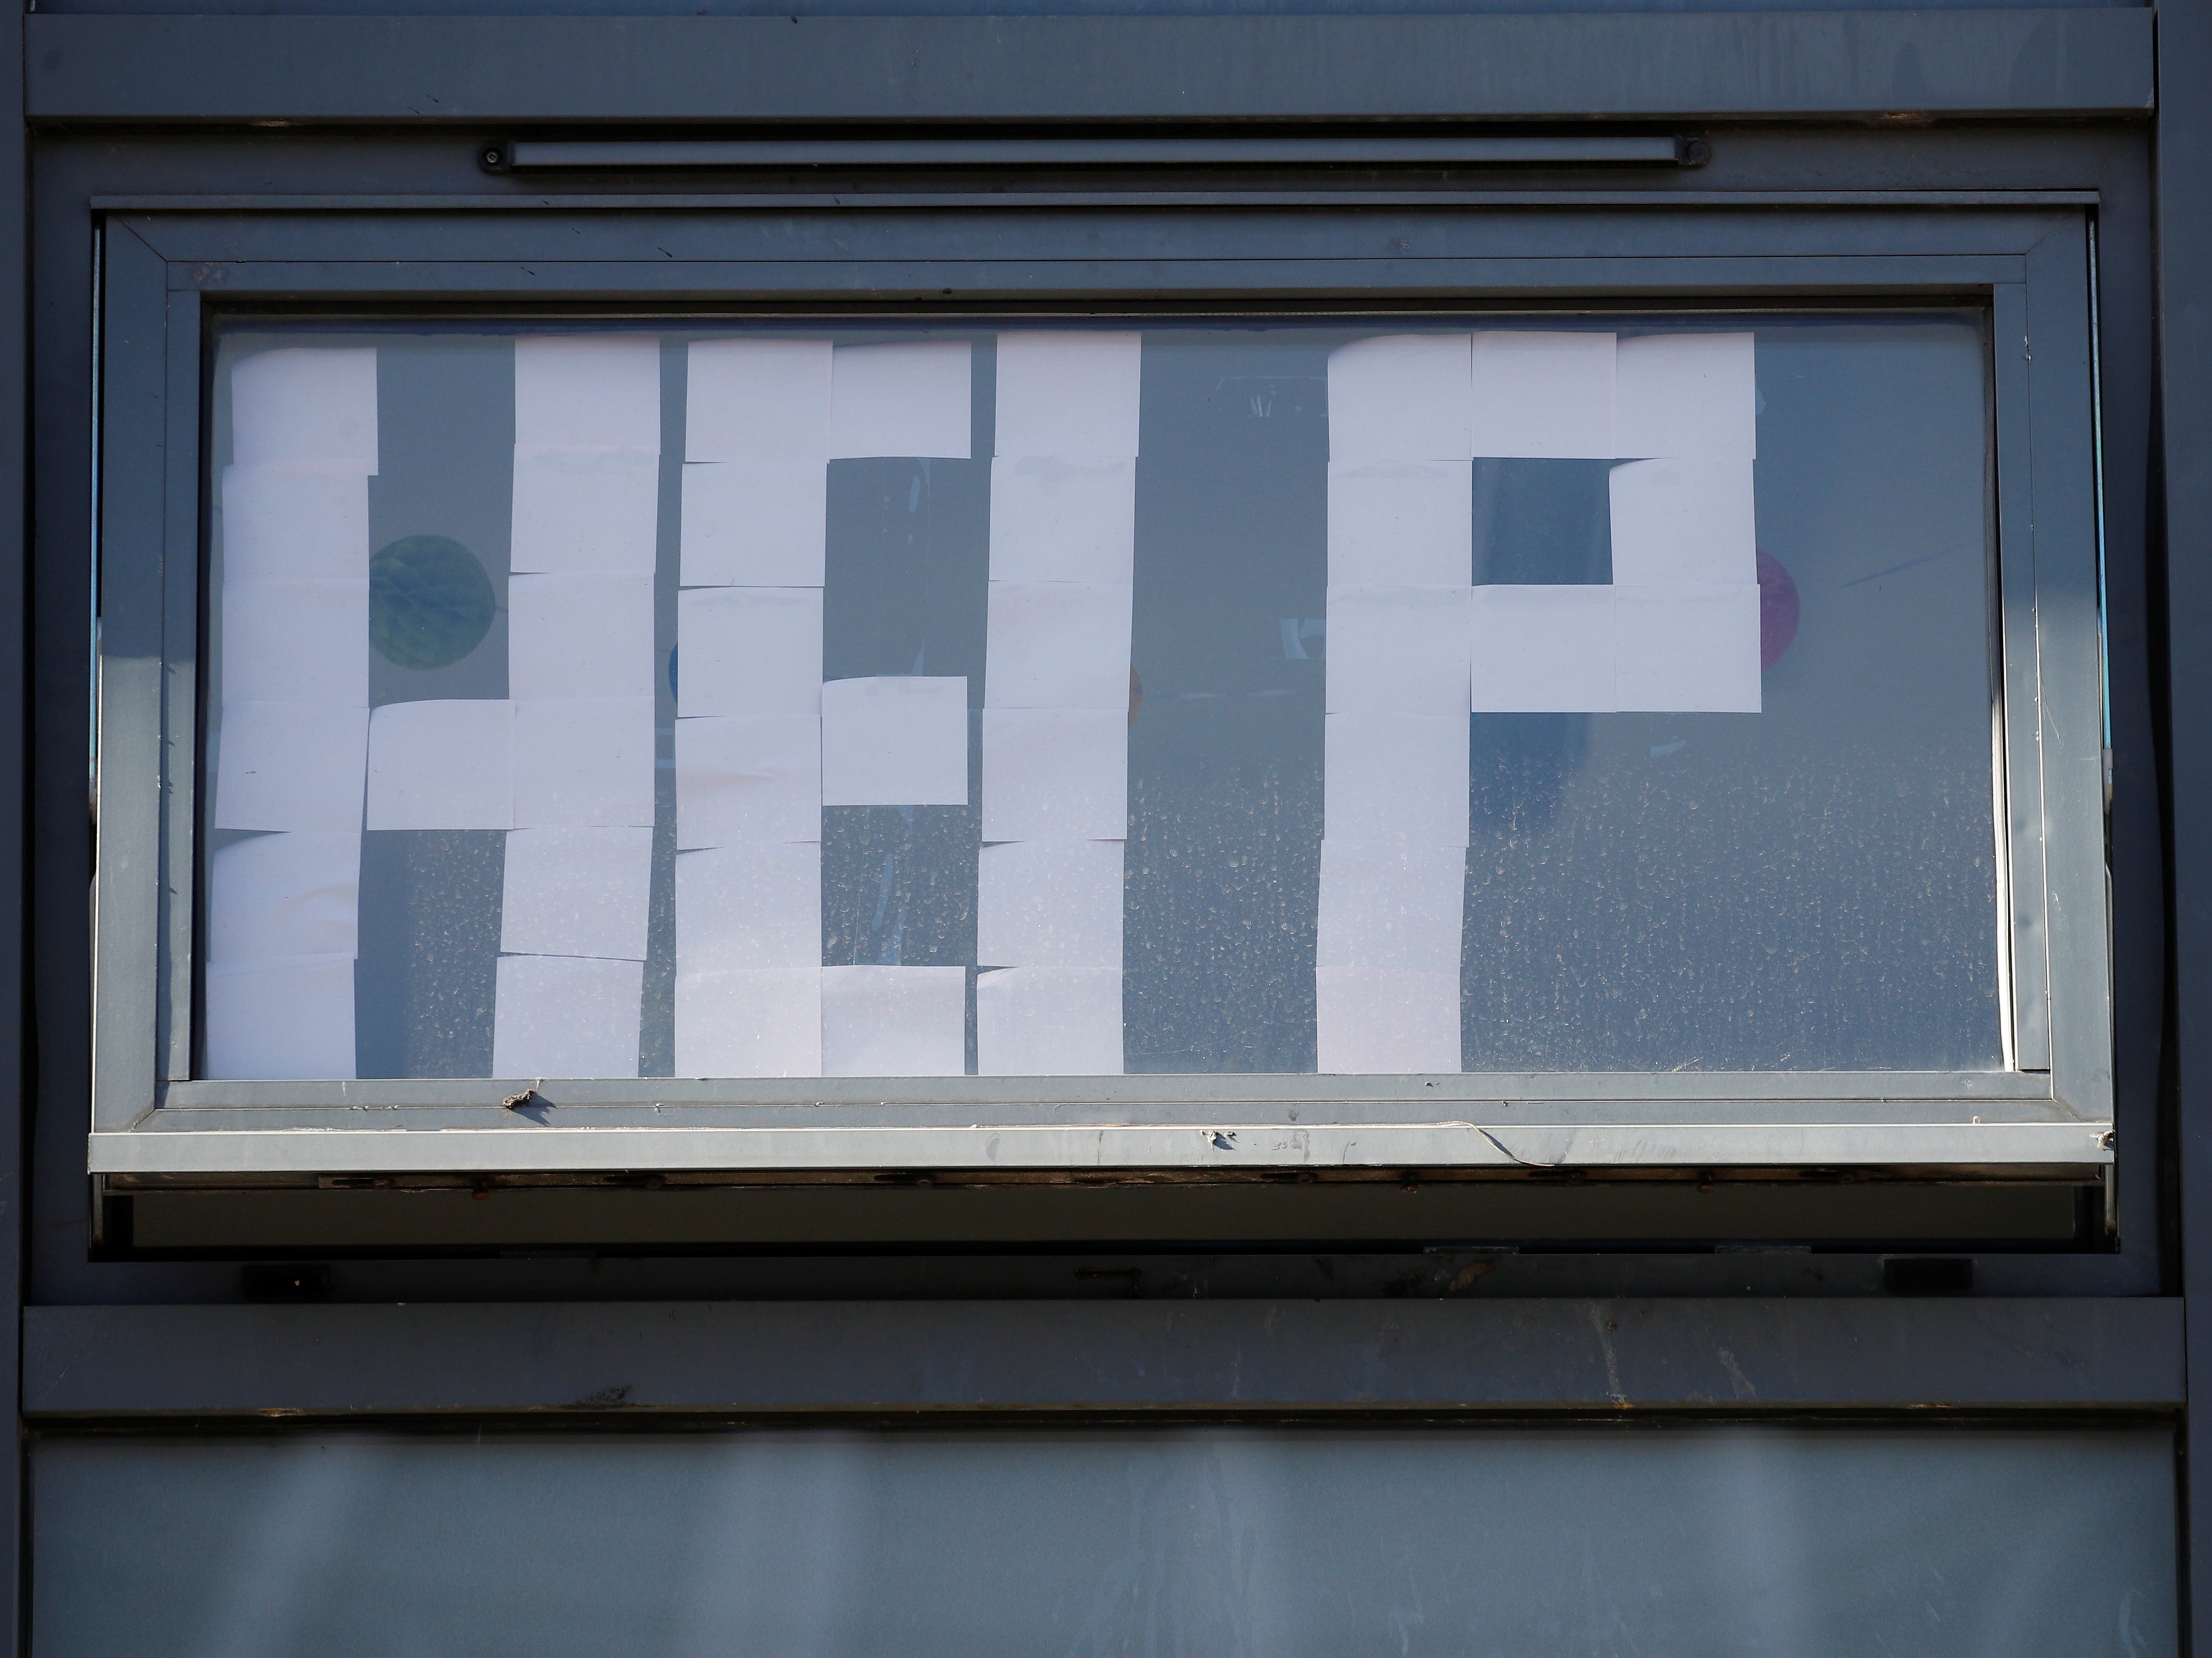 A 'Help' message is displayed at locked down student accommodation in Manchester